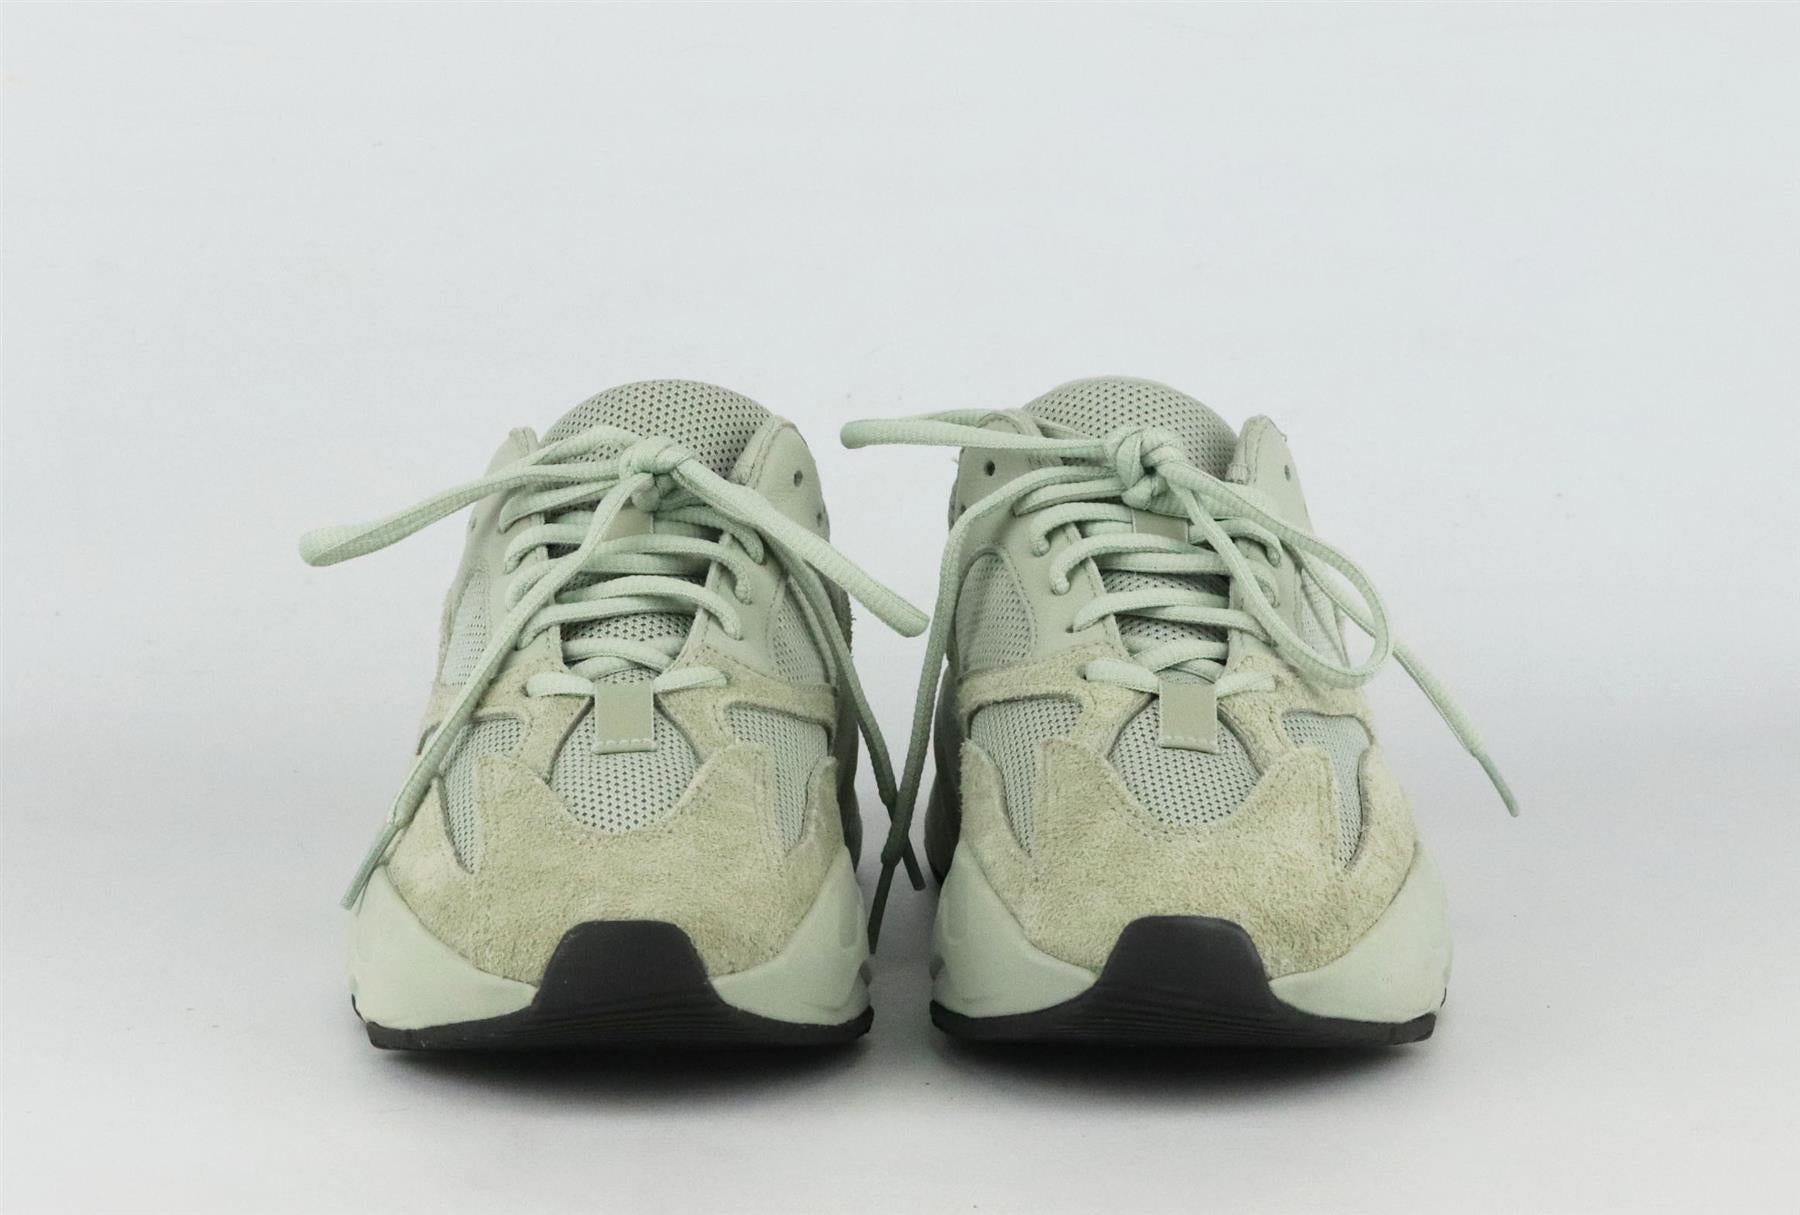 ADIDAS YEEZY BOOST 700 V1 MESH AND SUEDE SNEAKERS EU 39 UK 6 US 6